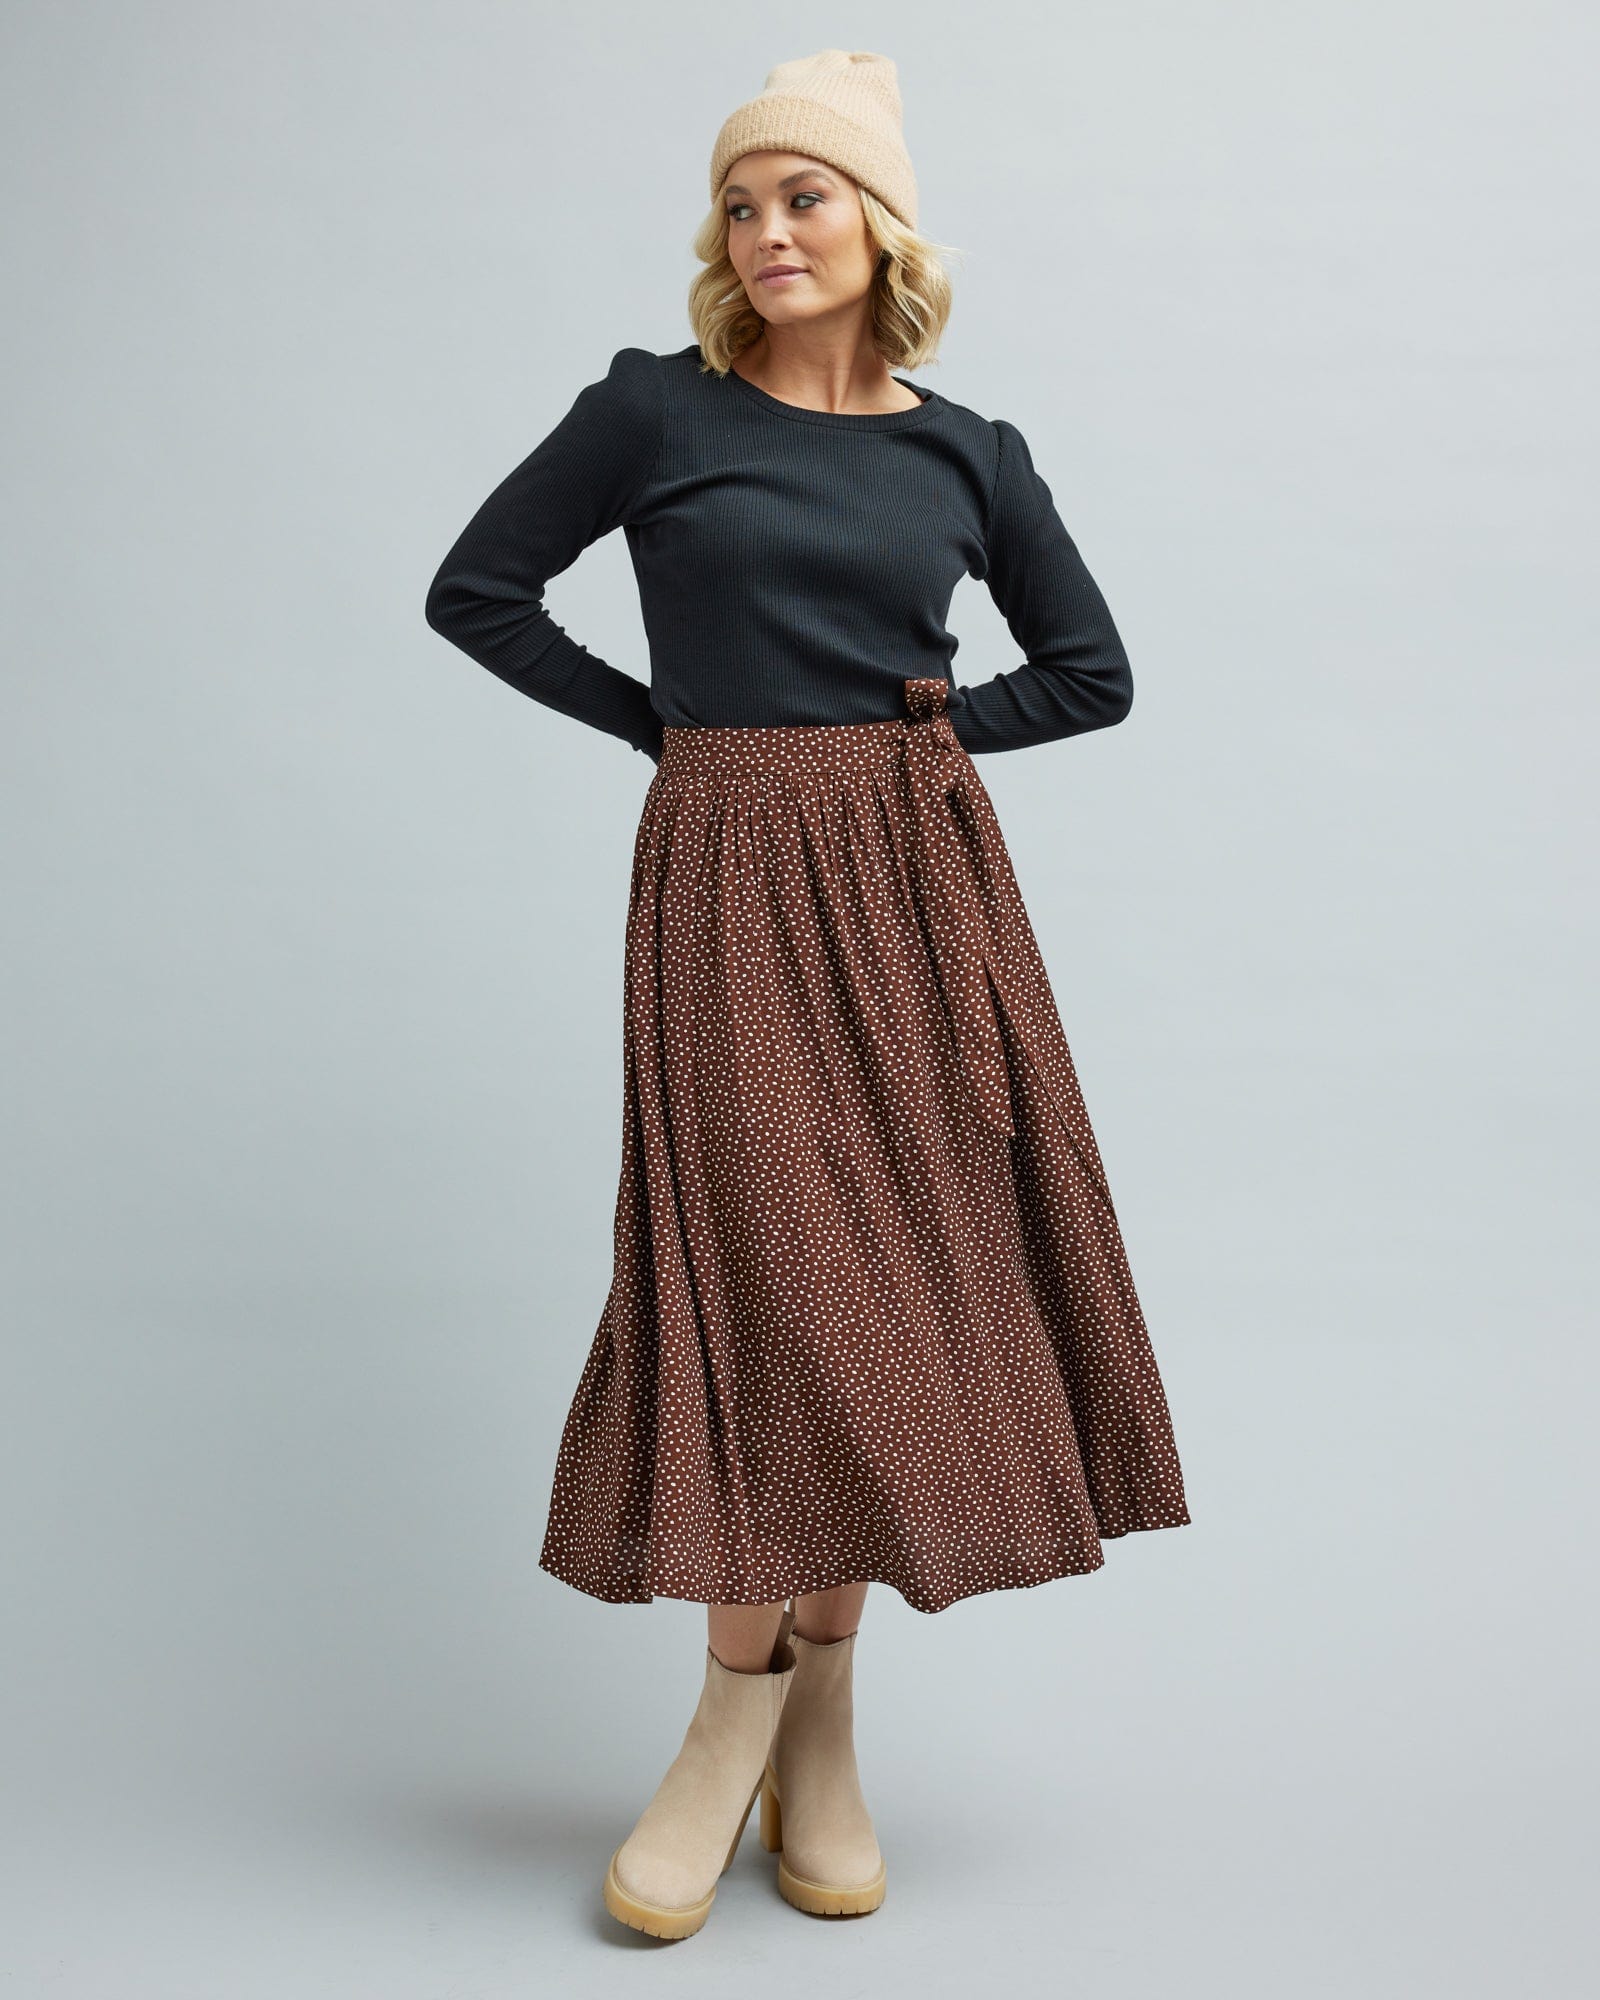 Woman in a brown, midi length skirt